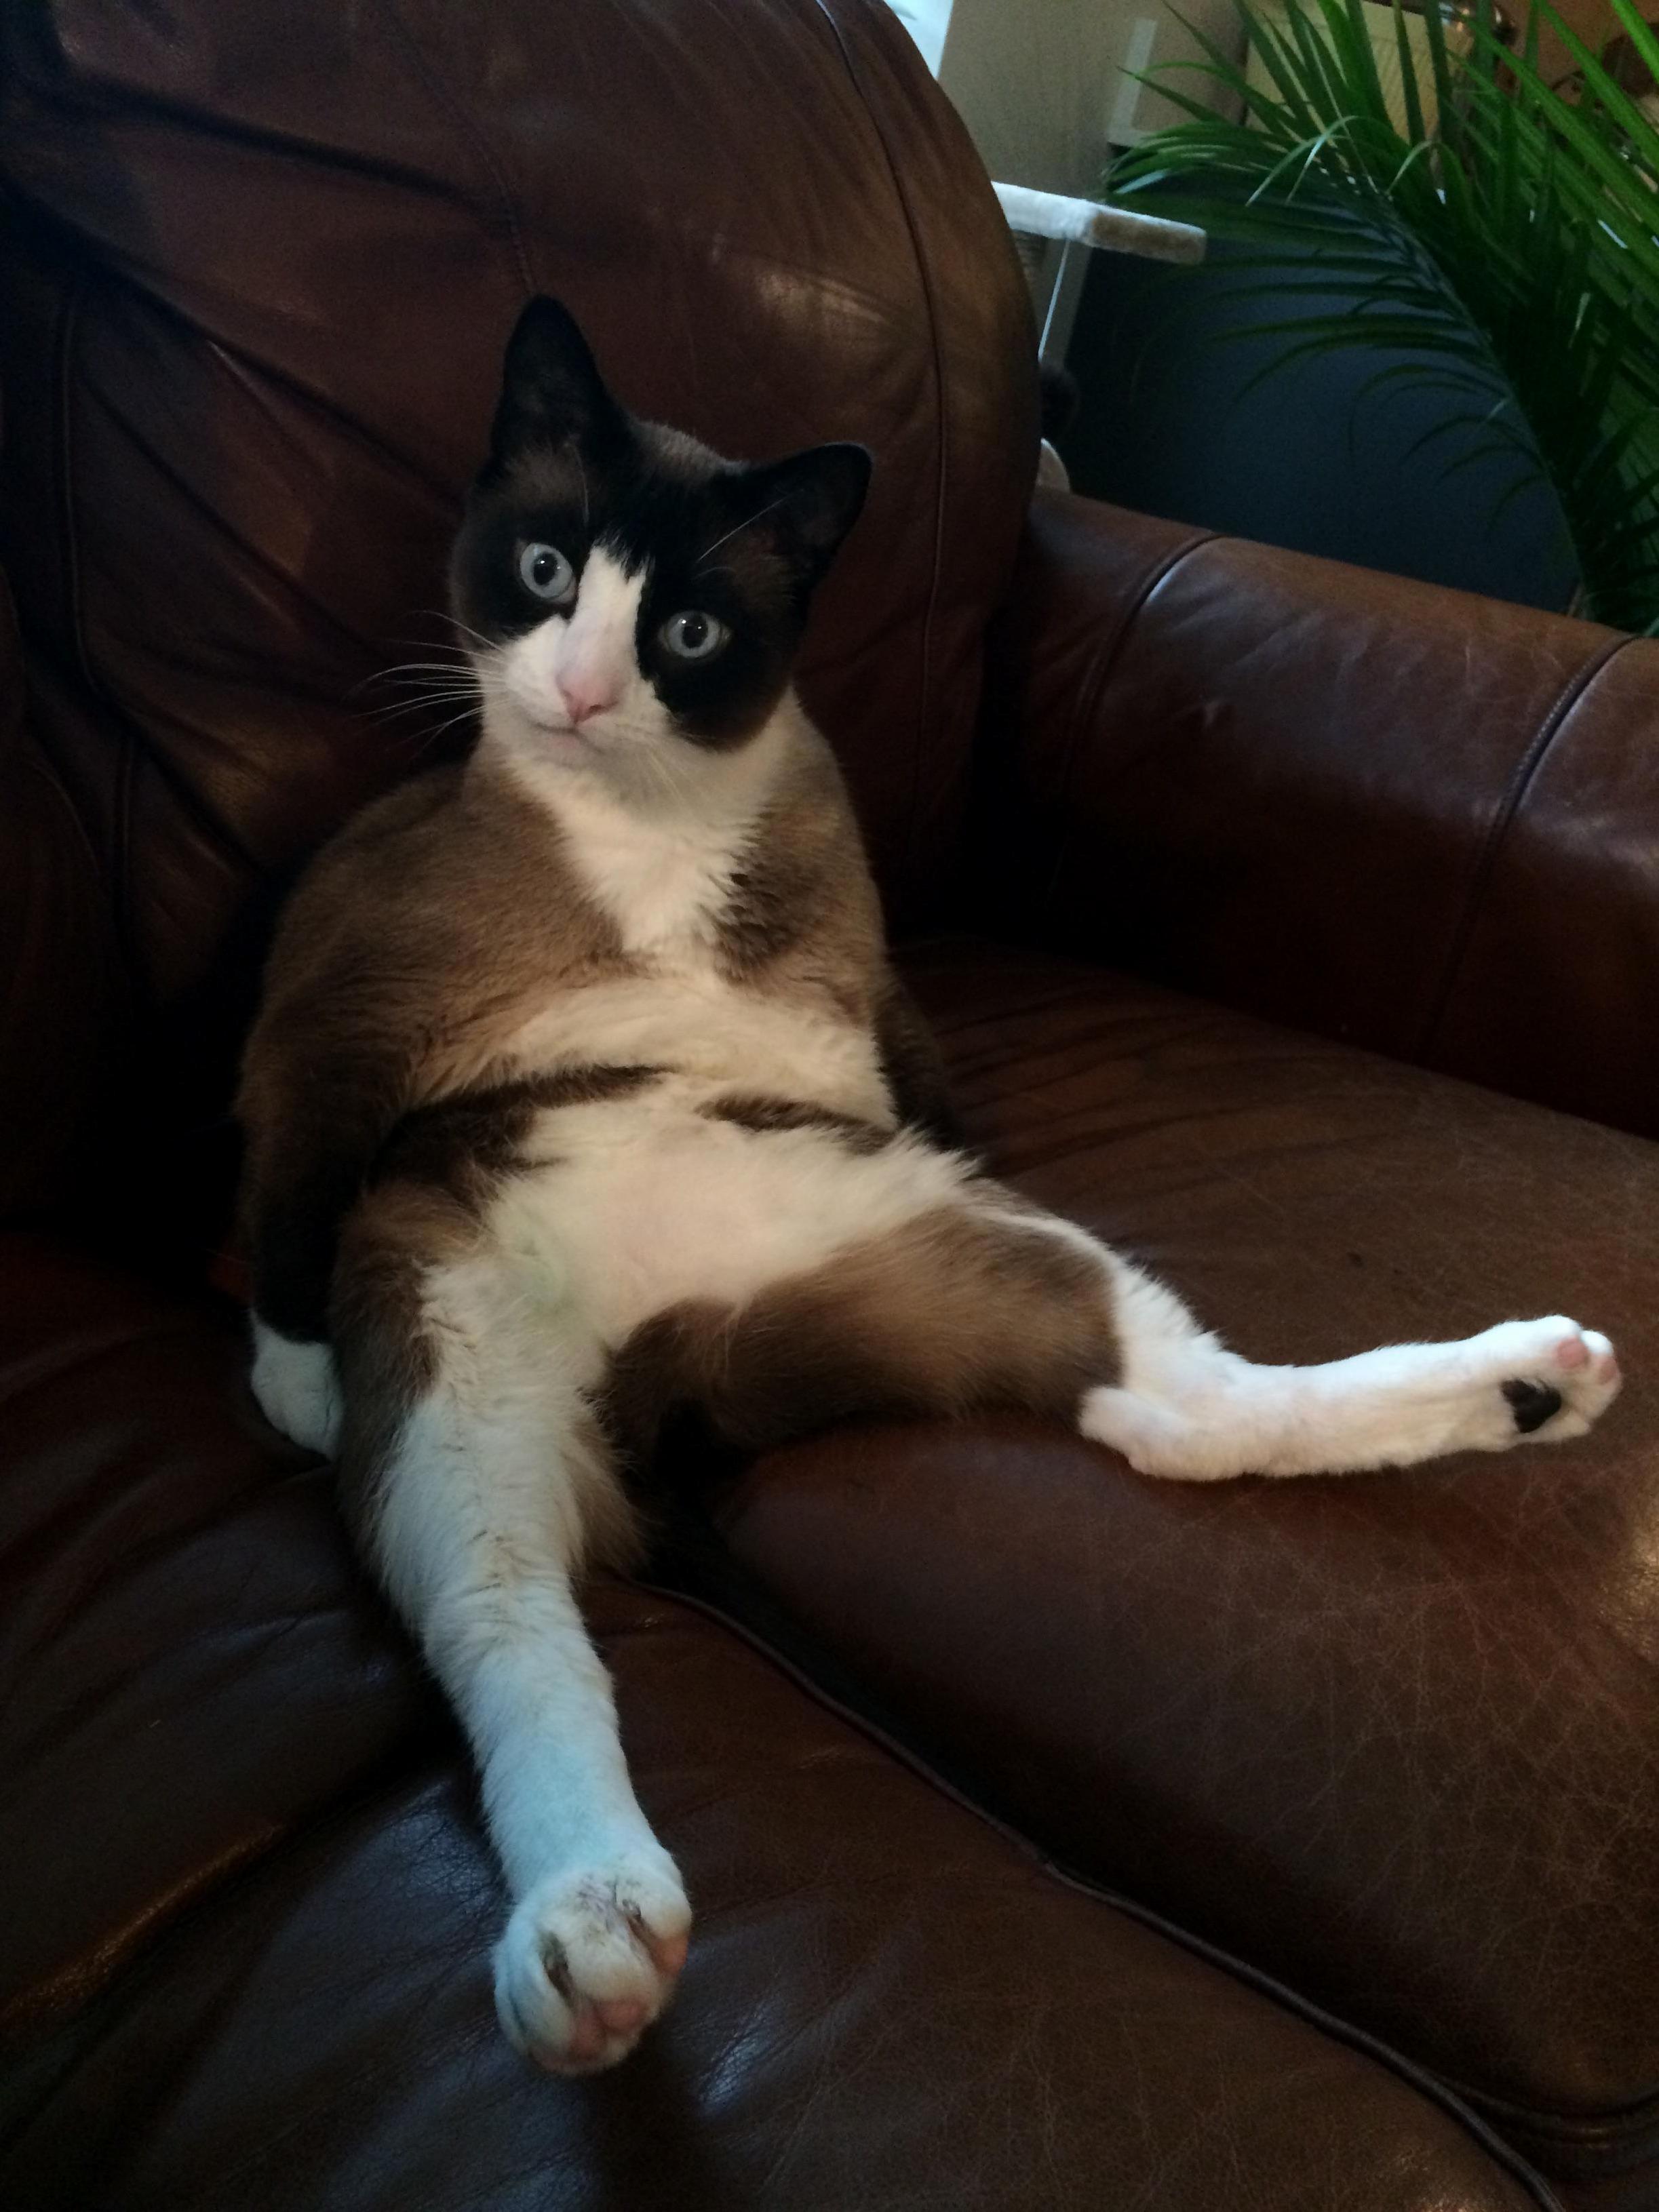 5 minutes into catnip and chill and he gives you this look…